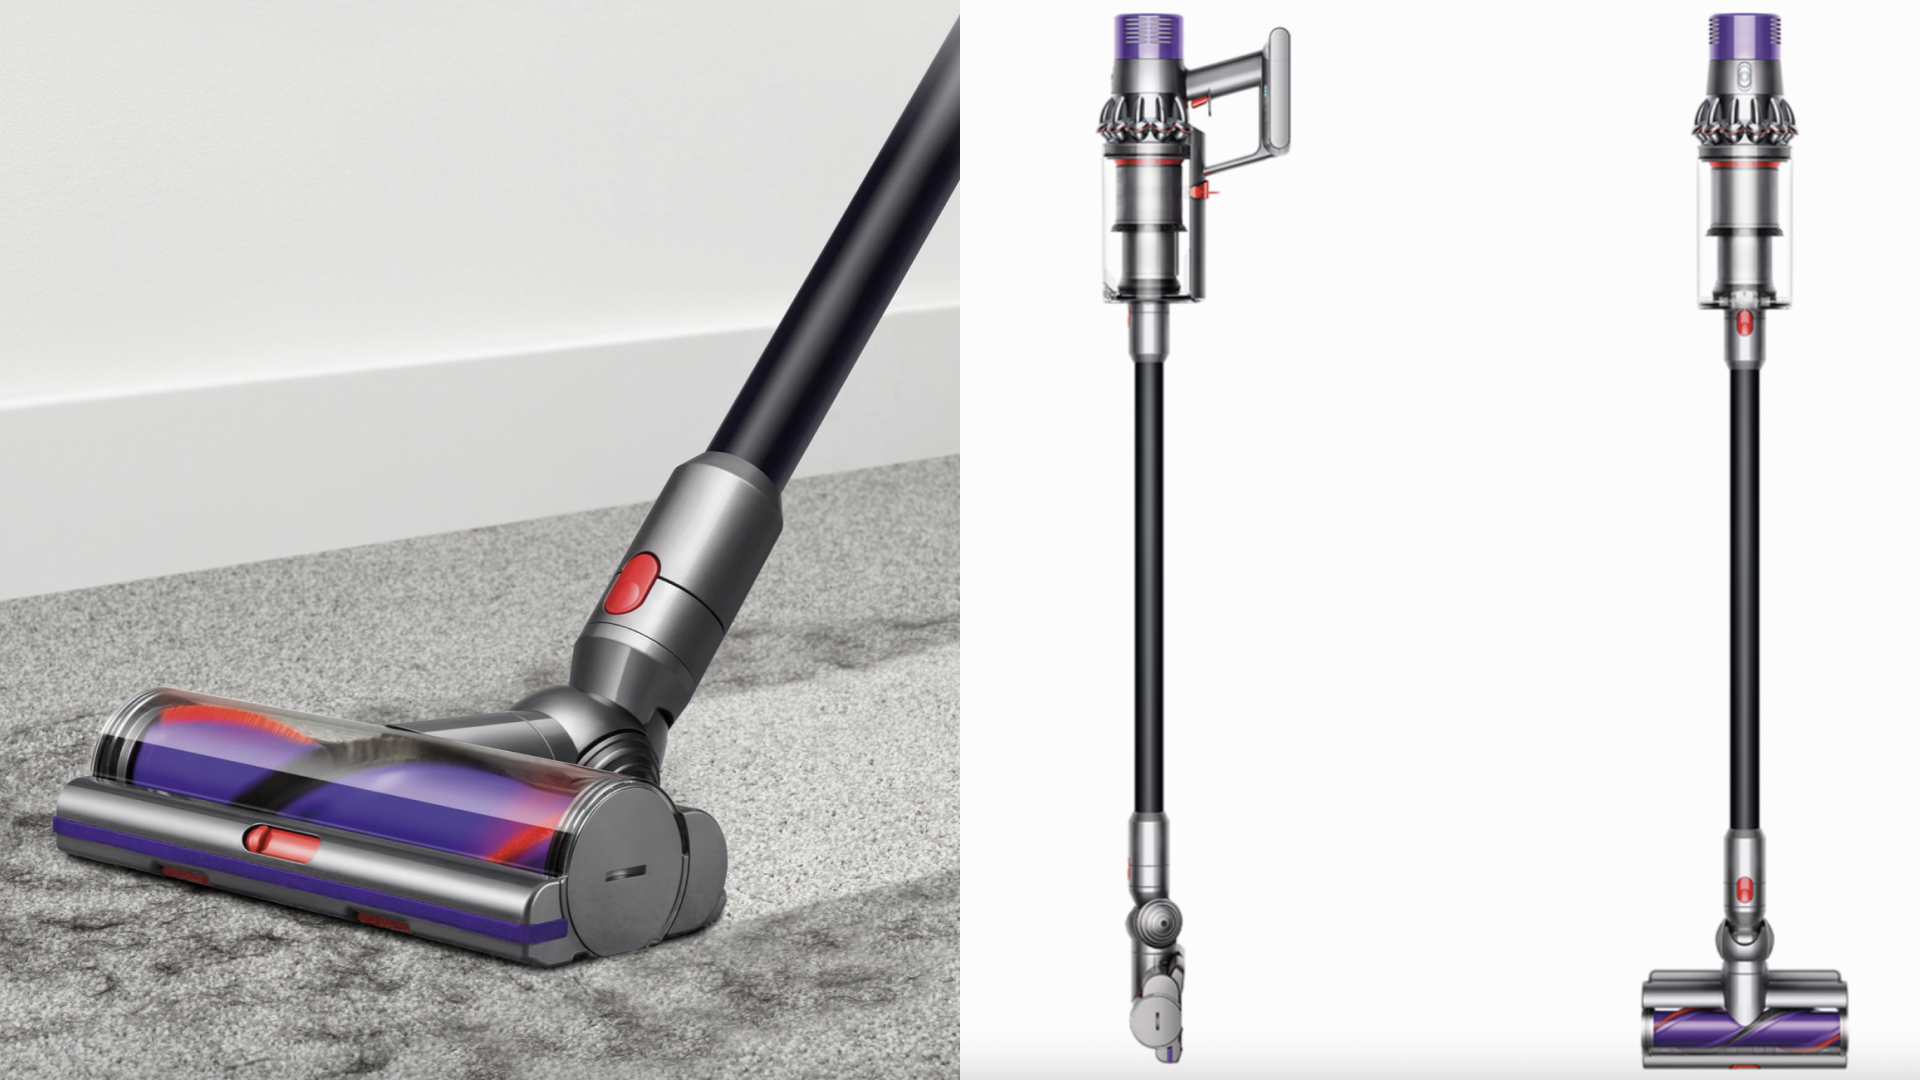 Dyson wedding gifts Cyclone v10 absolute